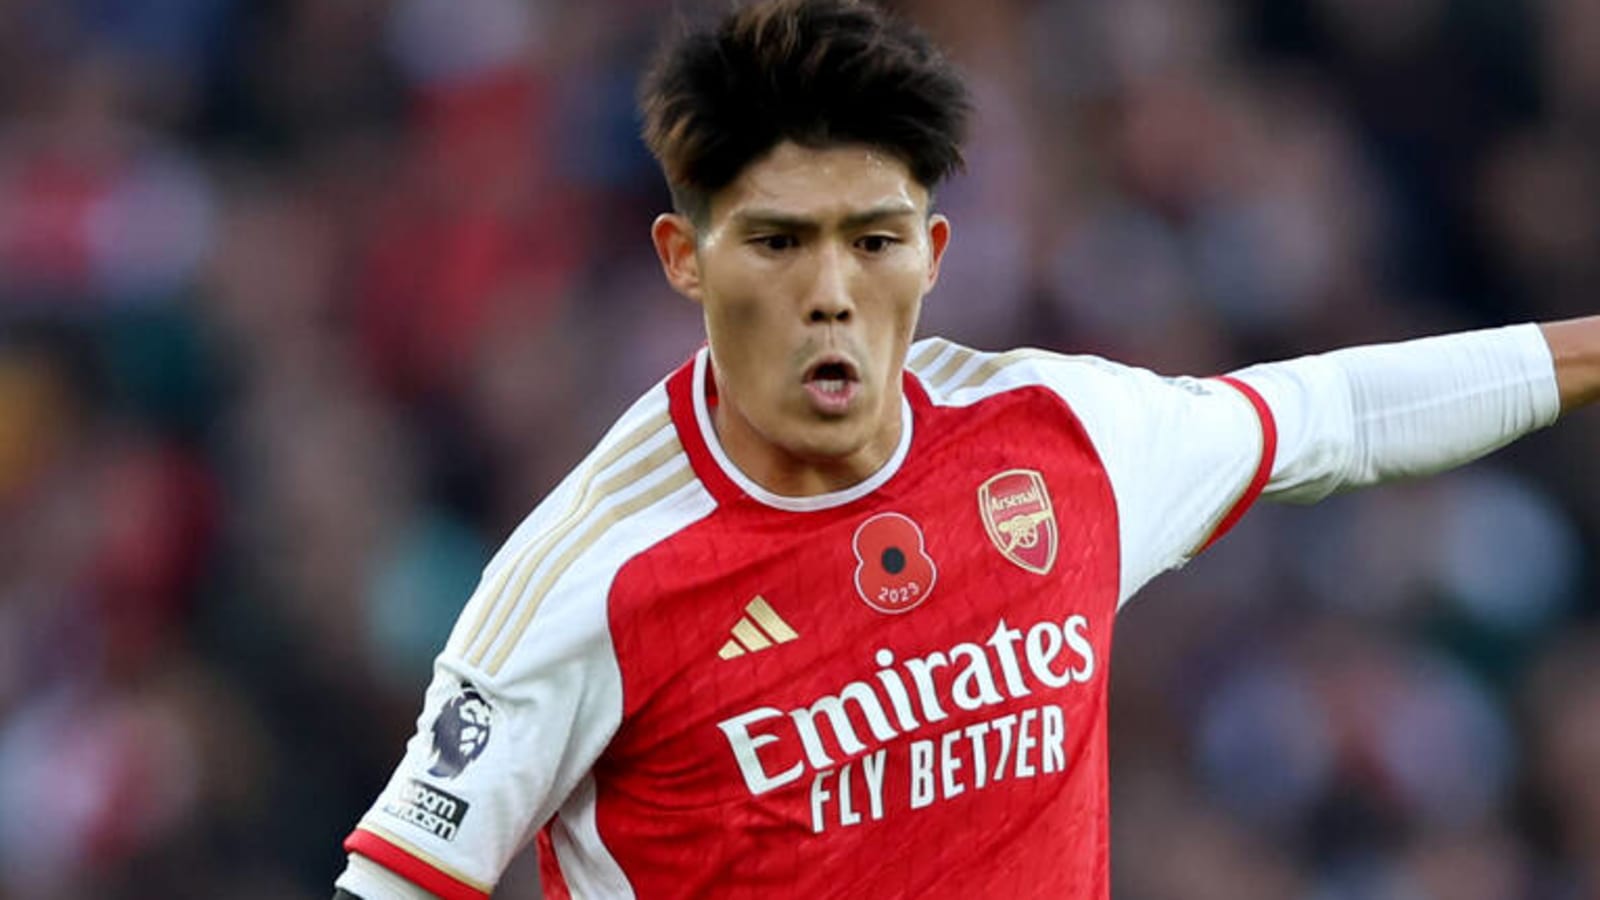 Tomiyasu on his new Arsenal contract: 'I dedicate my life to this club and the supporters'